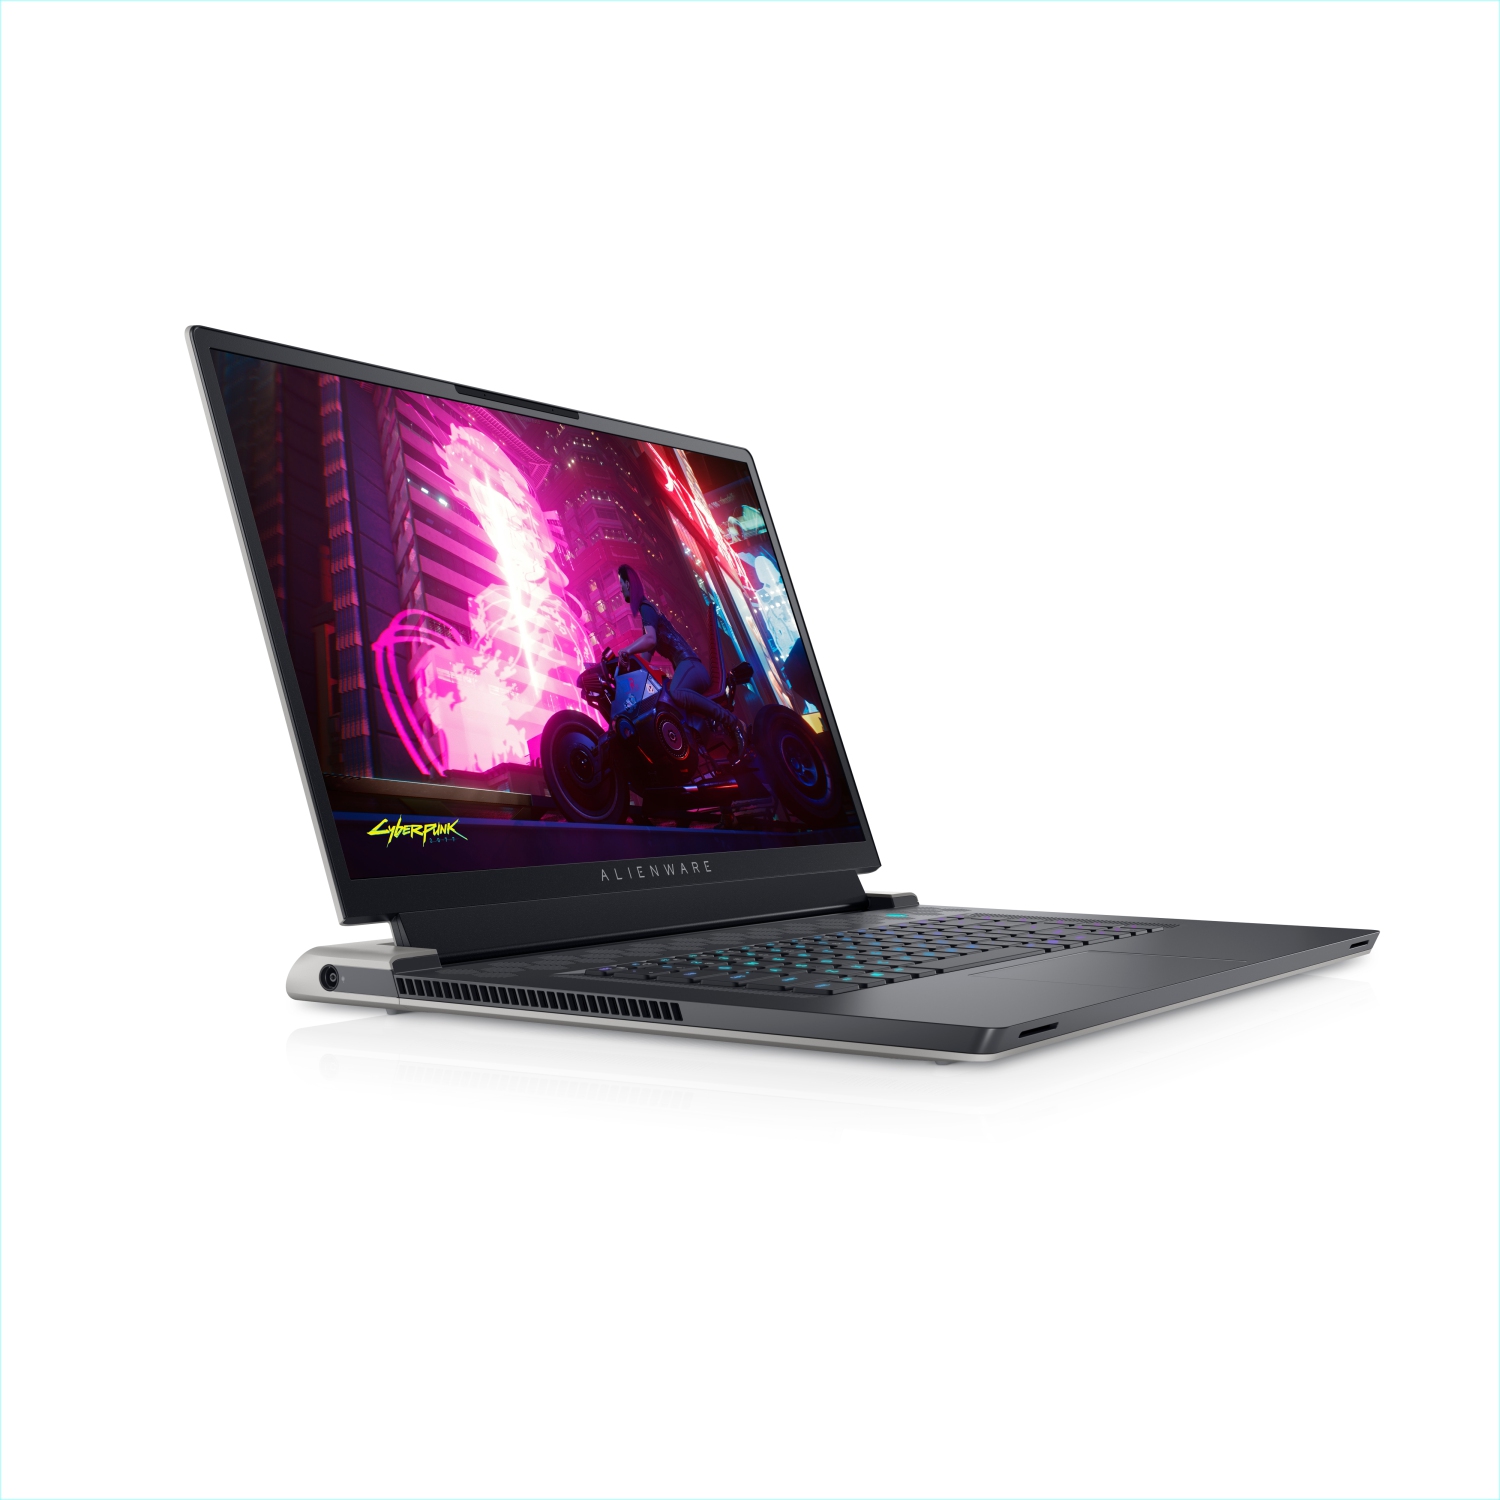 Refurbished (Excellent) - Dell Alienware X17 R1 Gaming Laptop (2021), 17.3" 4K, Core i7, 1TB SSD, 32GB RAM, RTX 3080, 8 Cores @ 4.6 GHz, 11th Gen CPU Certified